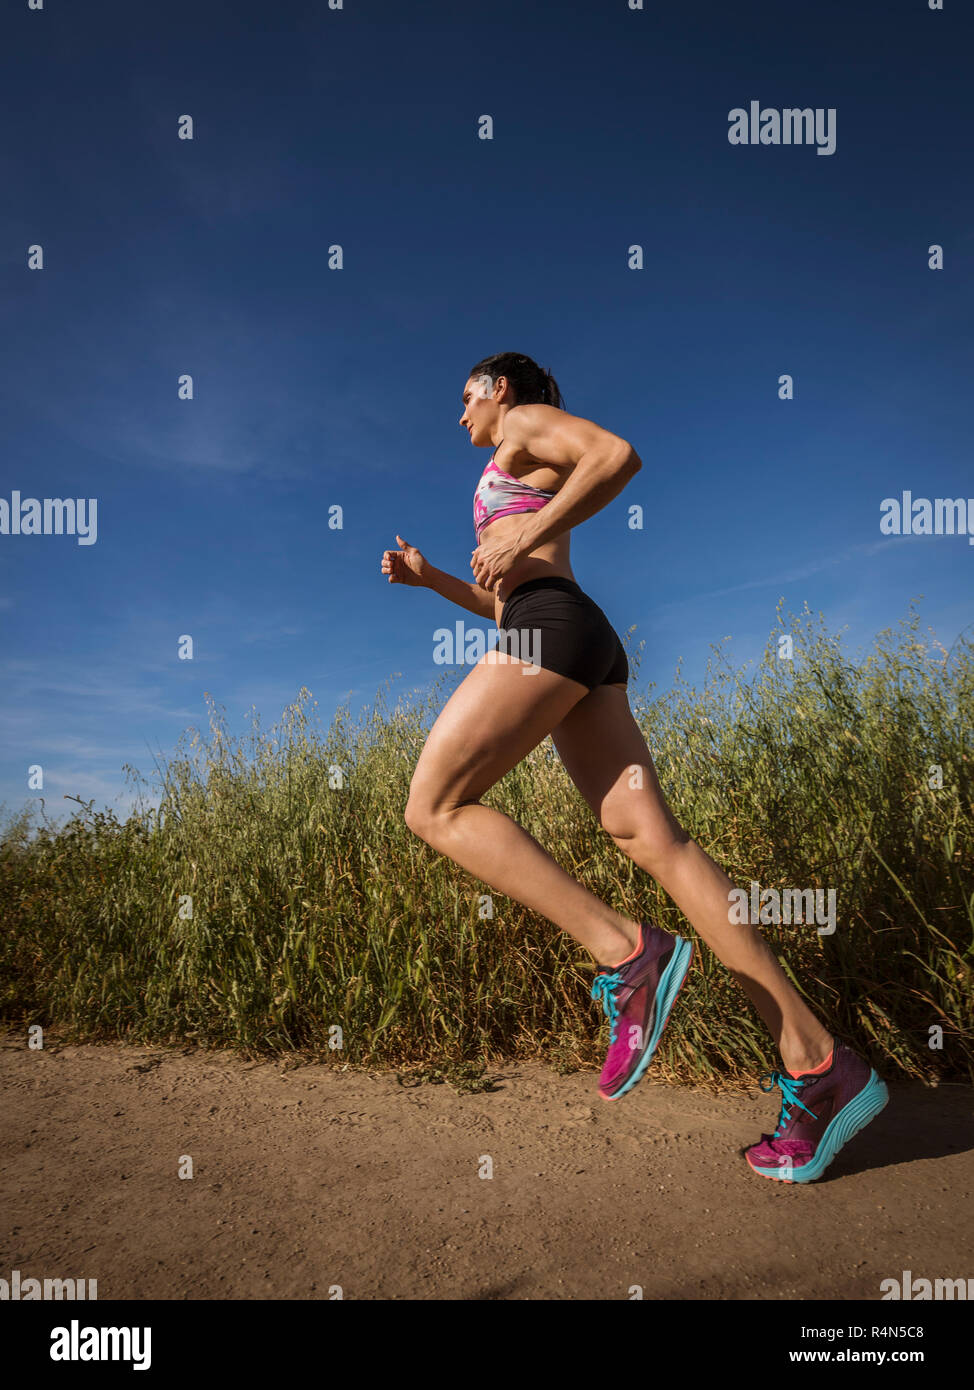 Mid adult woman jogging on path through field Stock Photo